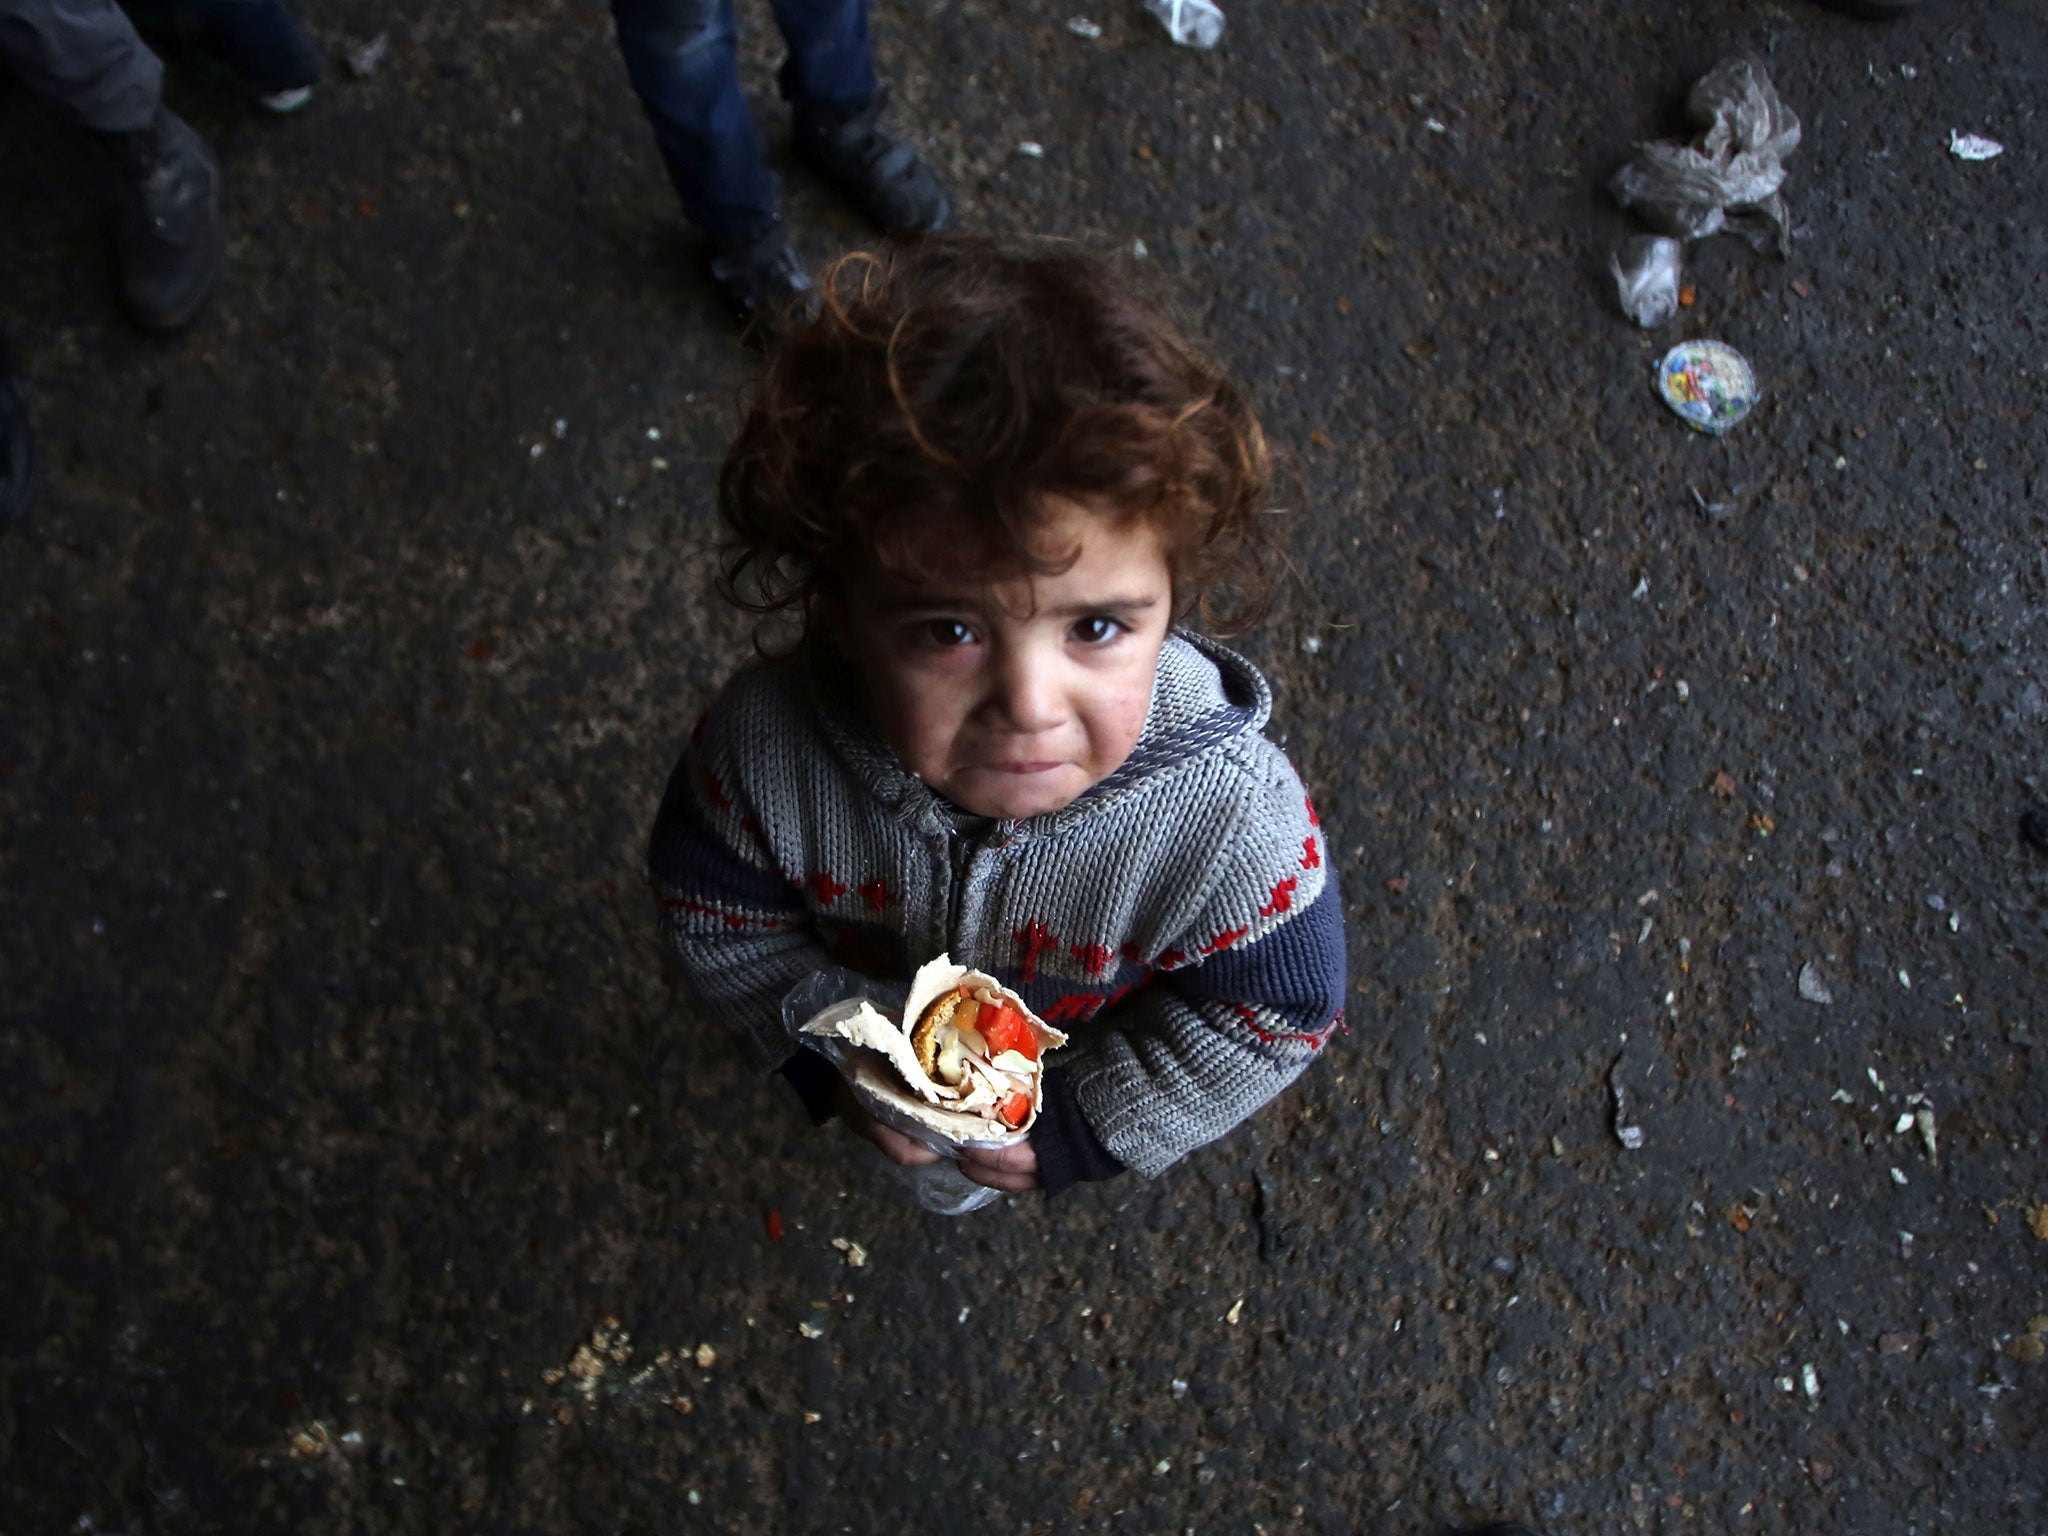 &#13;
Syrian children, such as this one at a shelter in Jibrin, face severe dangers &#13;